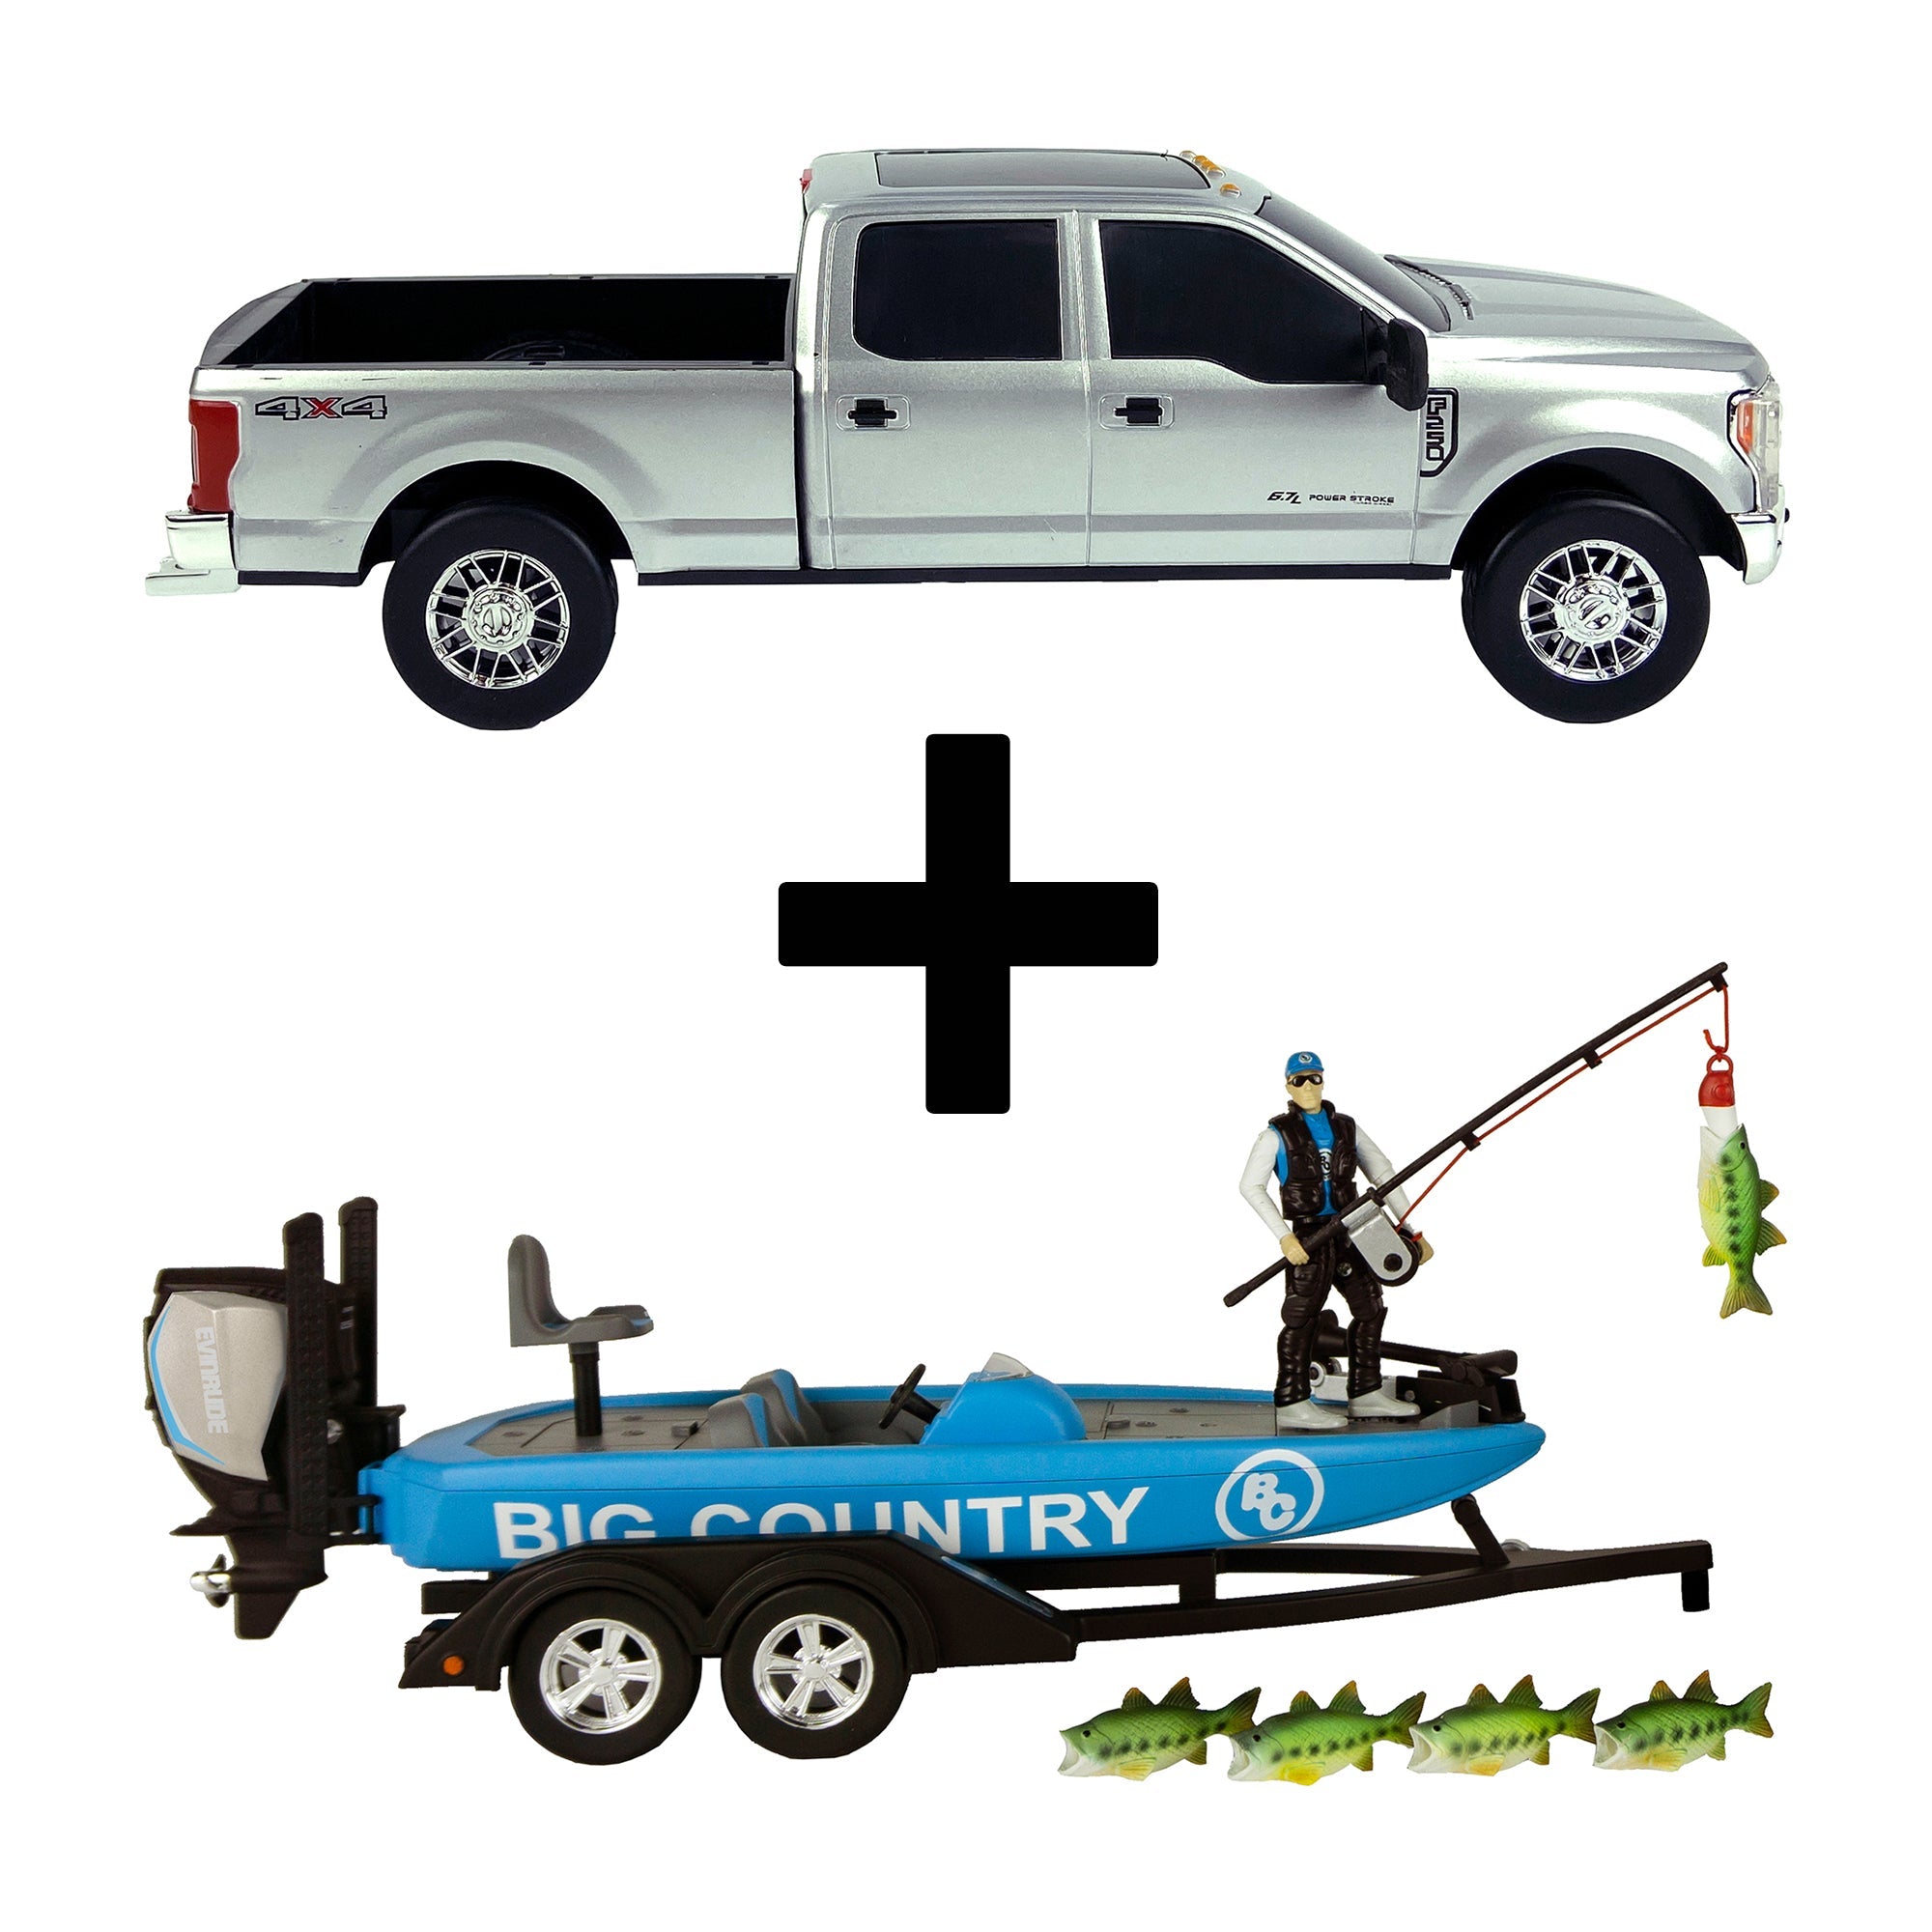 Big Country Toys, Ford Super Duty F-250 & Bass Boat Bundle